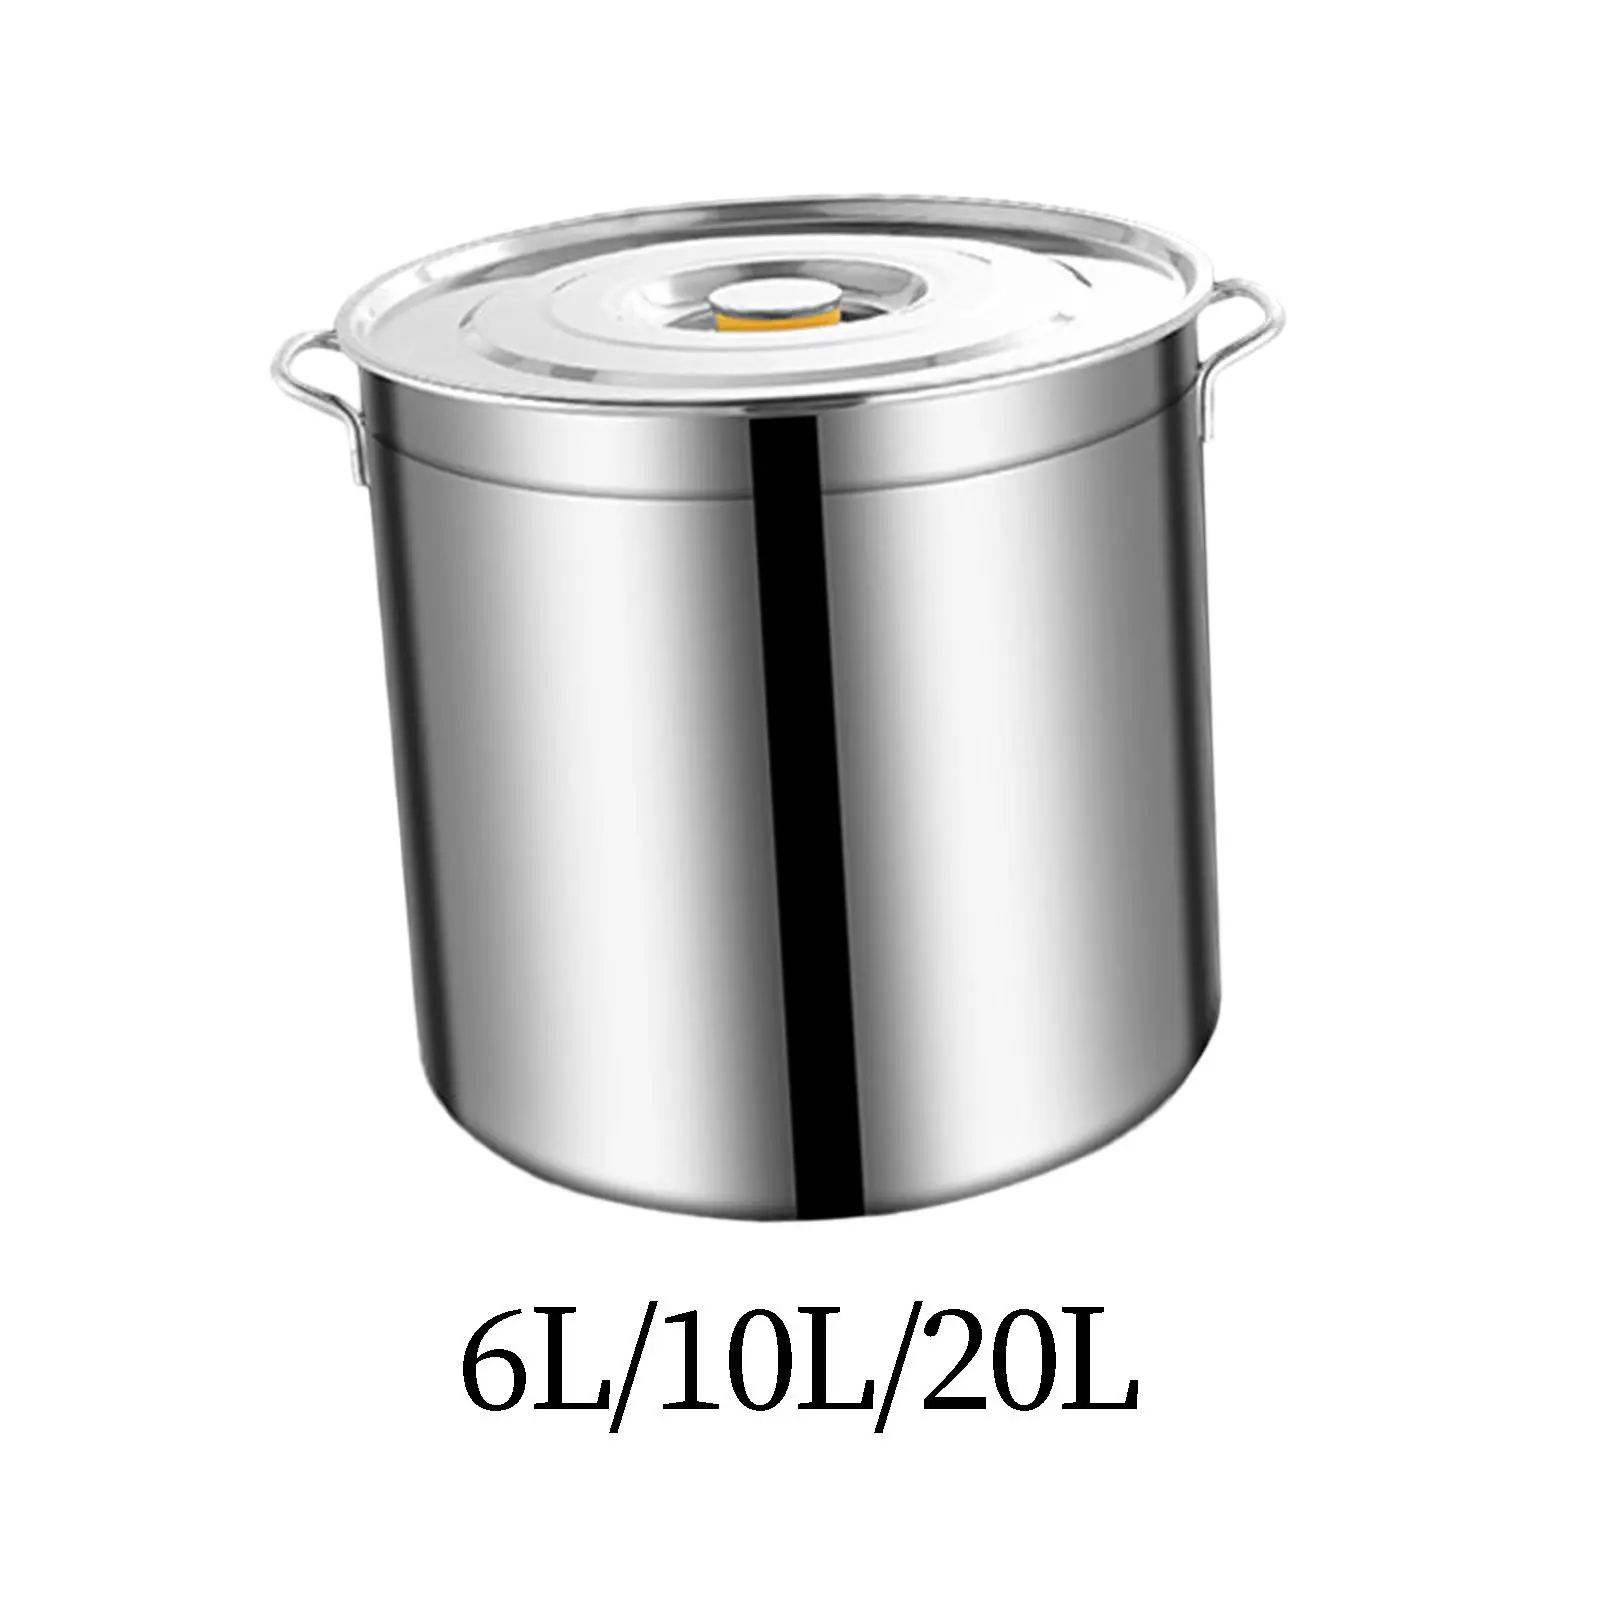 Stainless Steel Stockpot Oil Bucket for Boiling Strew Simmer with Lid Canning Pasta Pot for Hotel Commercial Household Canteens